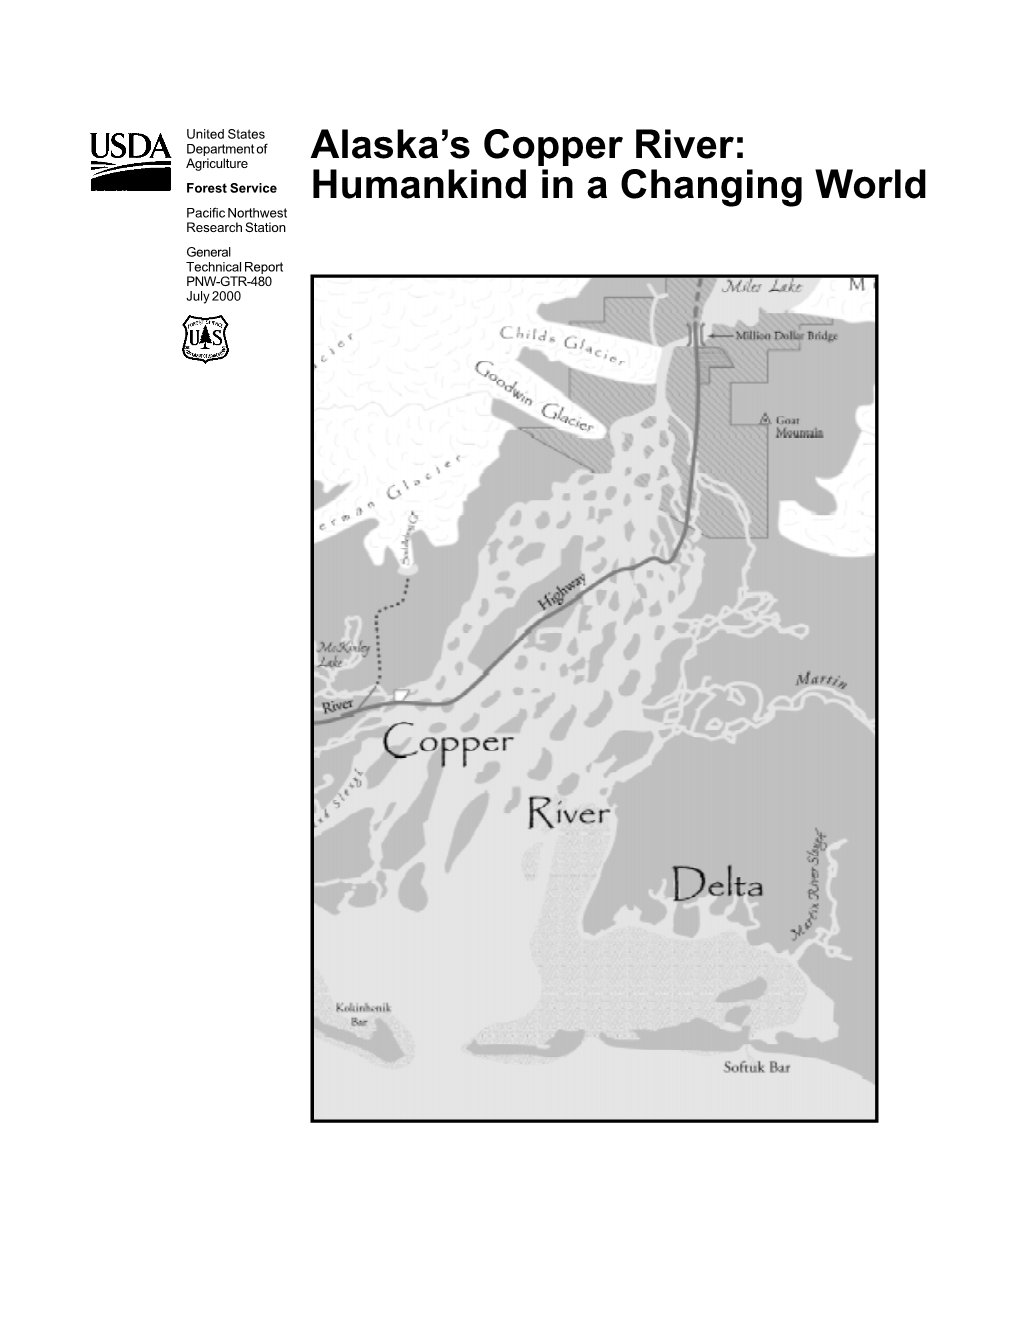 Alaska's Copper River: Humankind in a Changing World